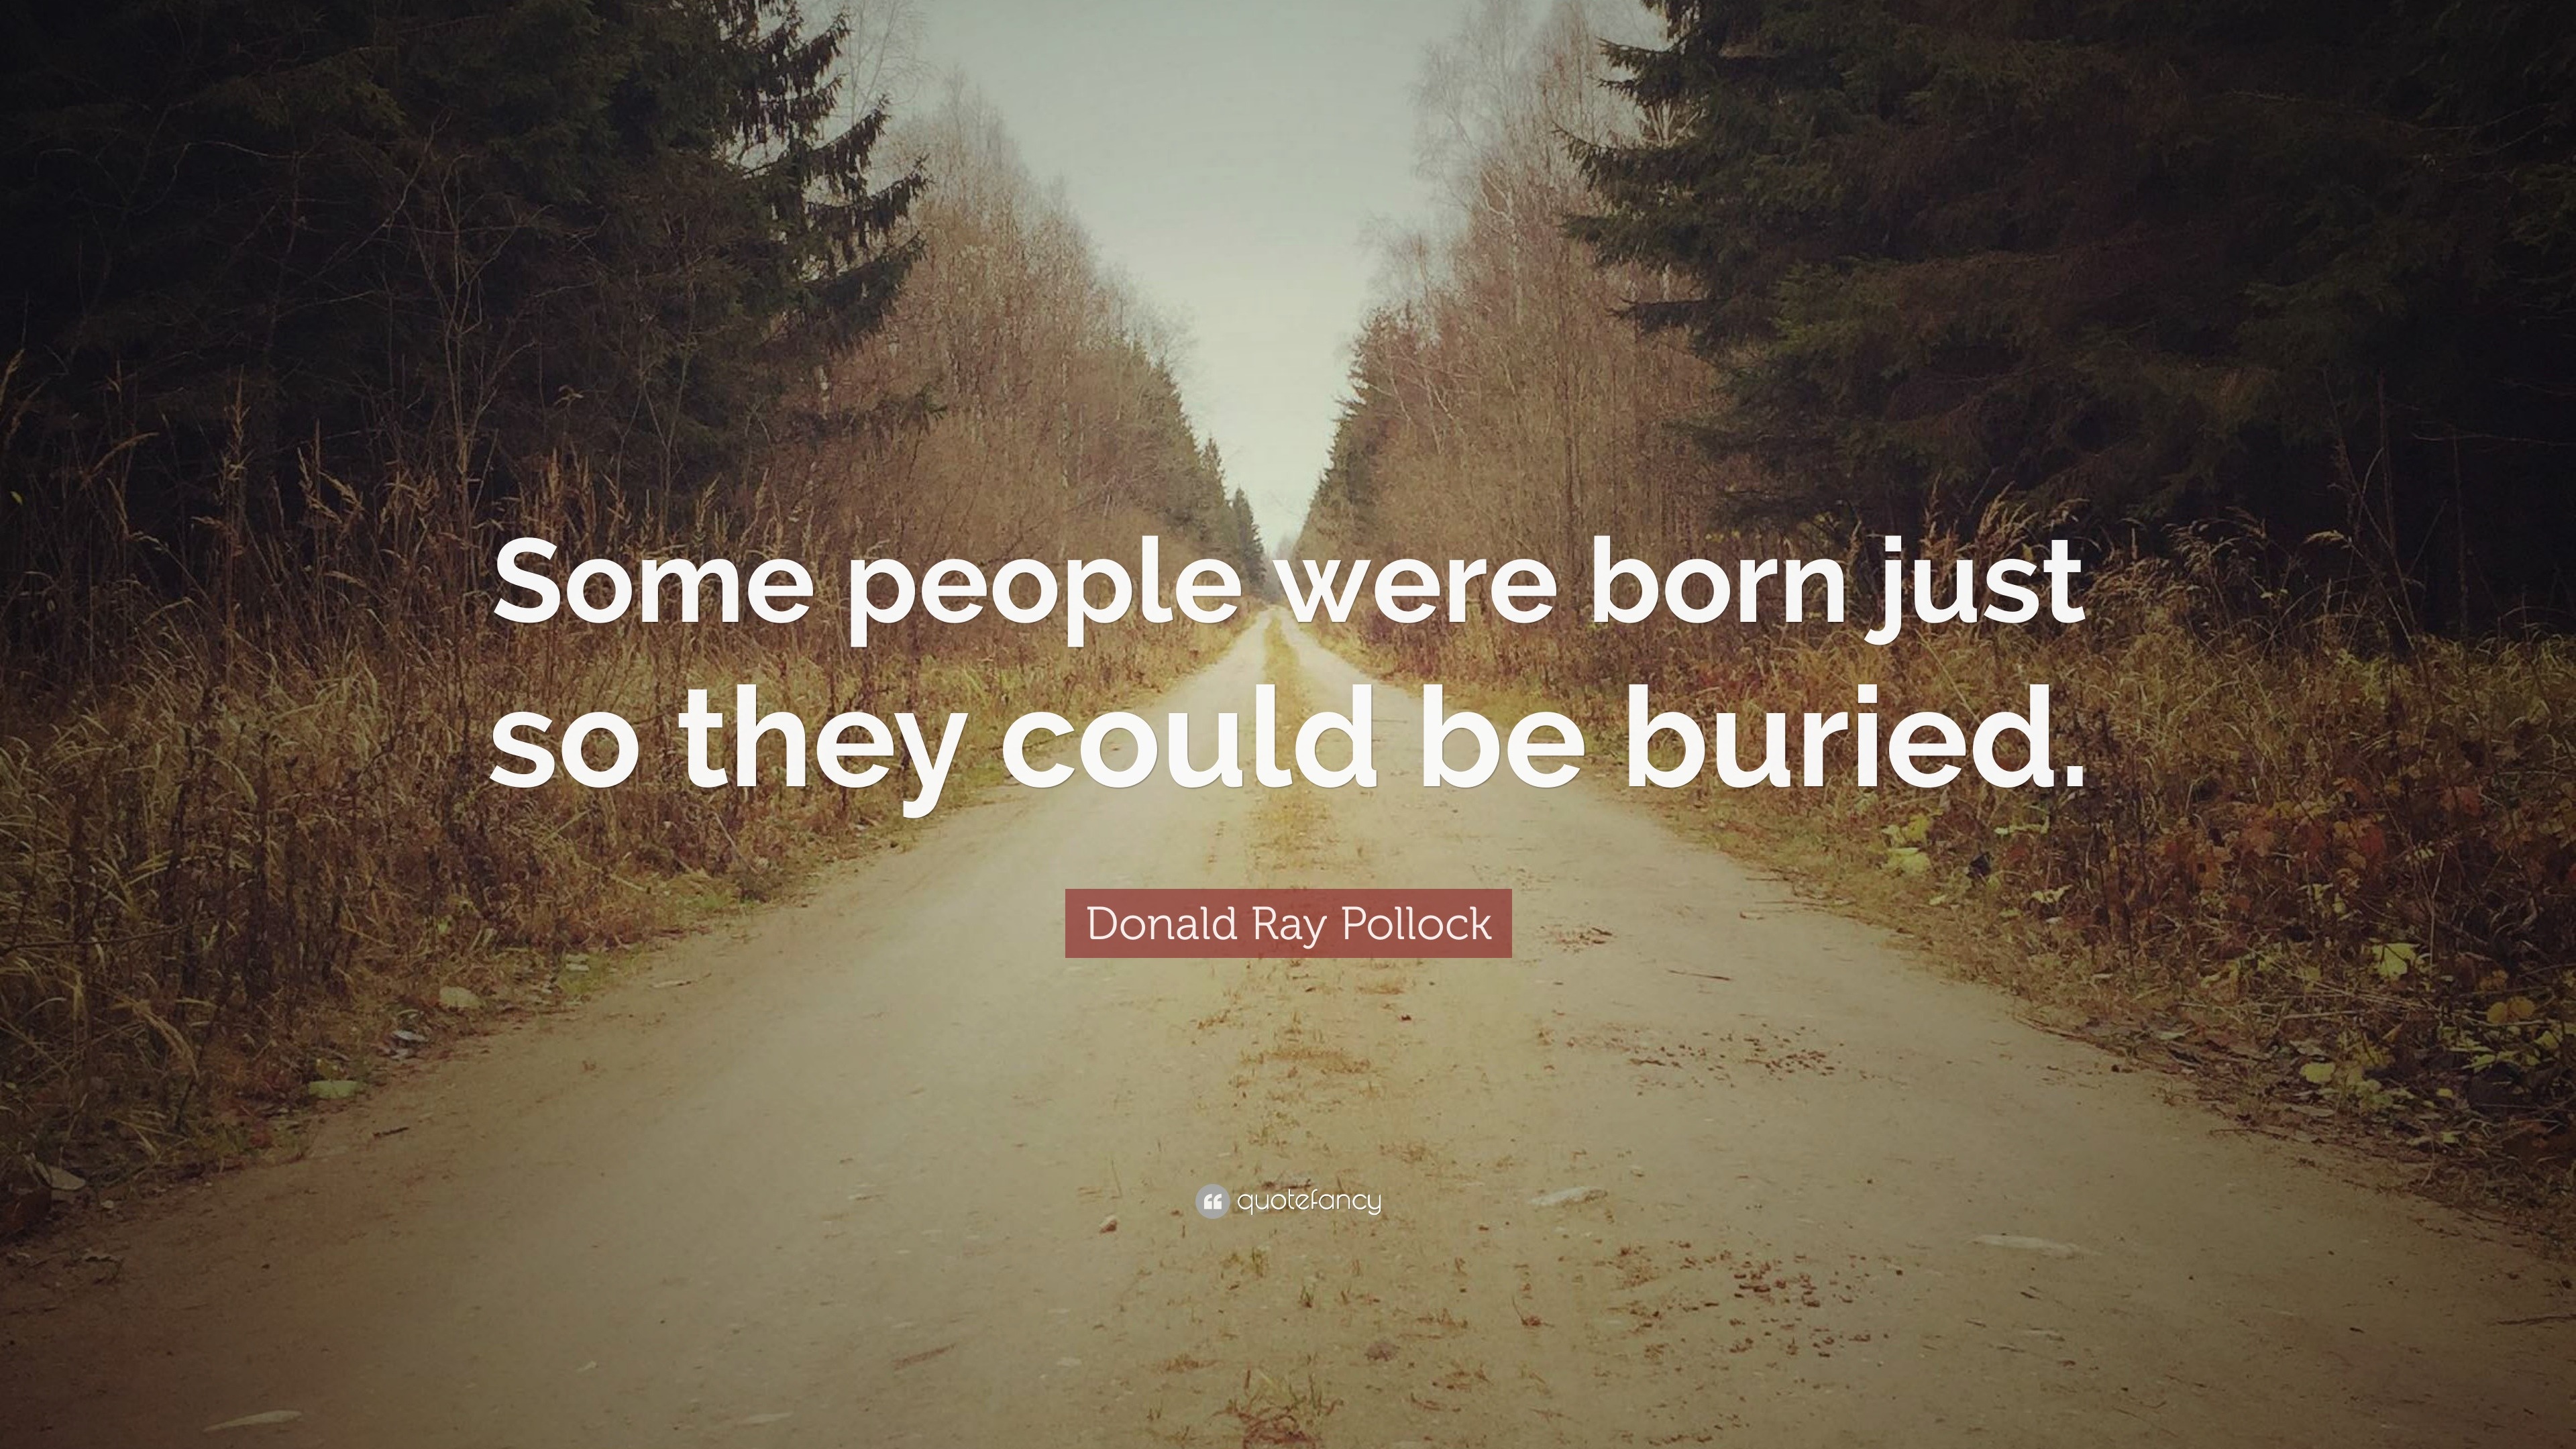 Donald Ray Pollock Quote: “Some people were born just so they could be ...